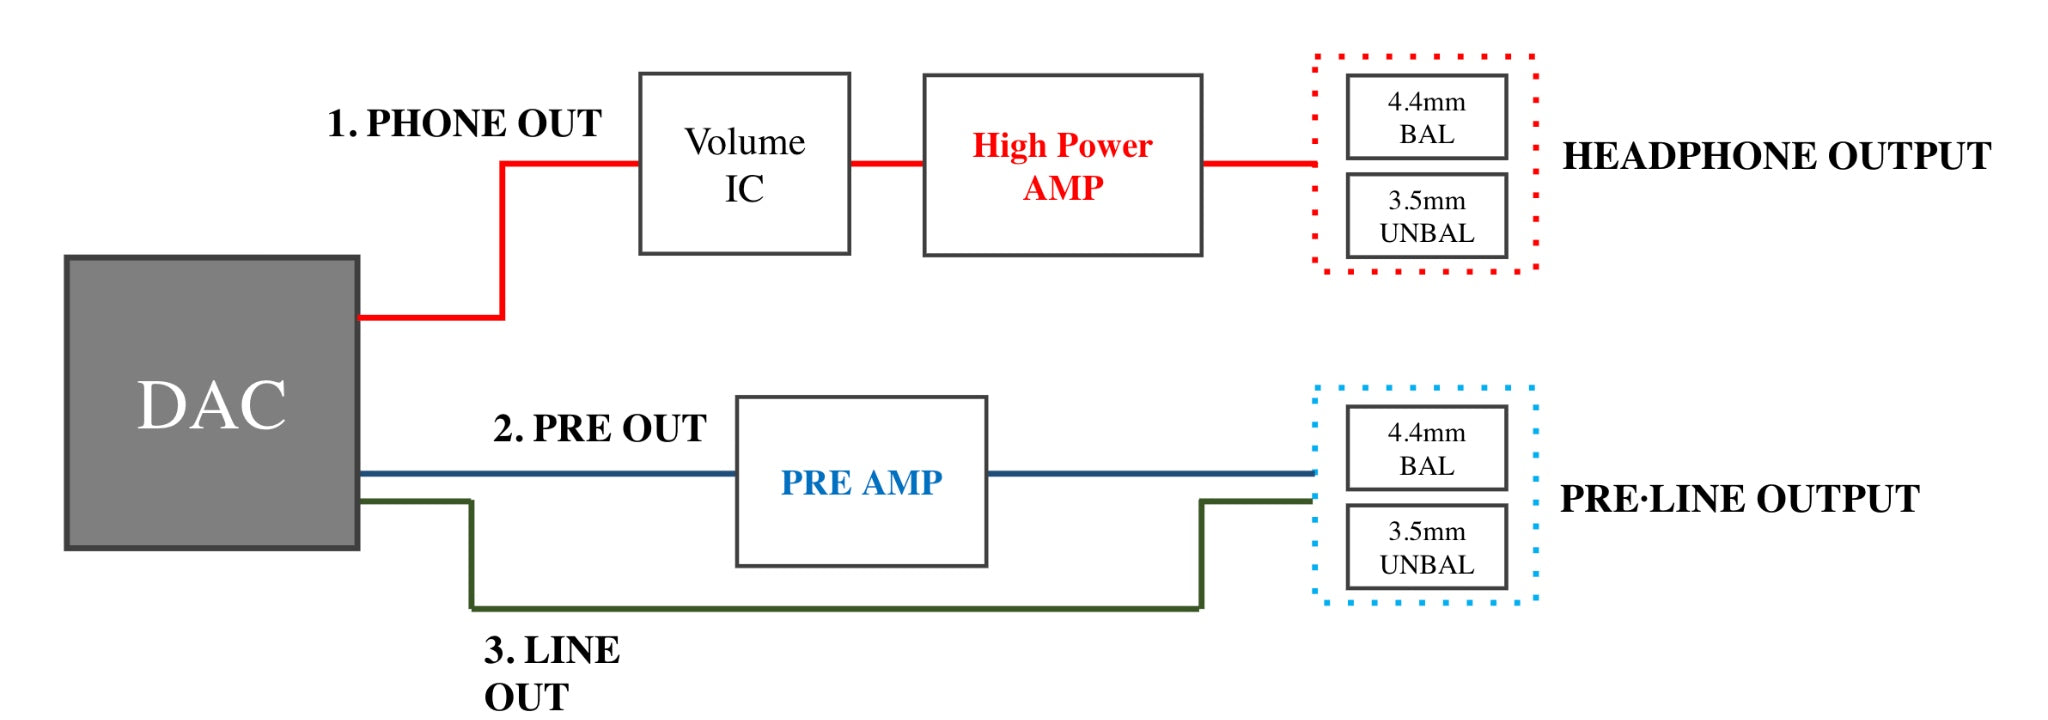 A&K Triple Output Mode schematic